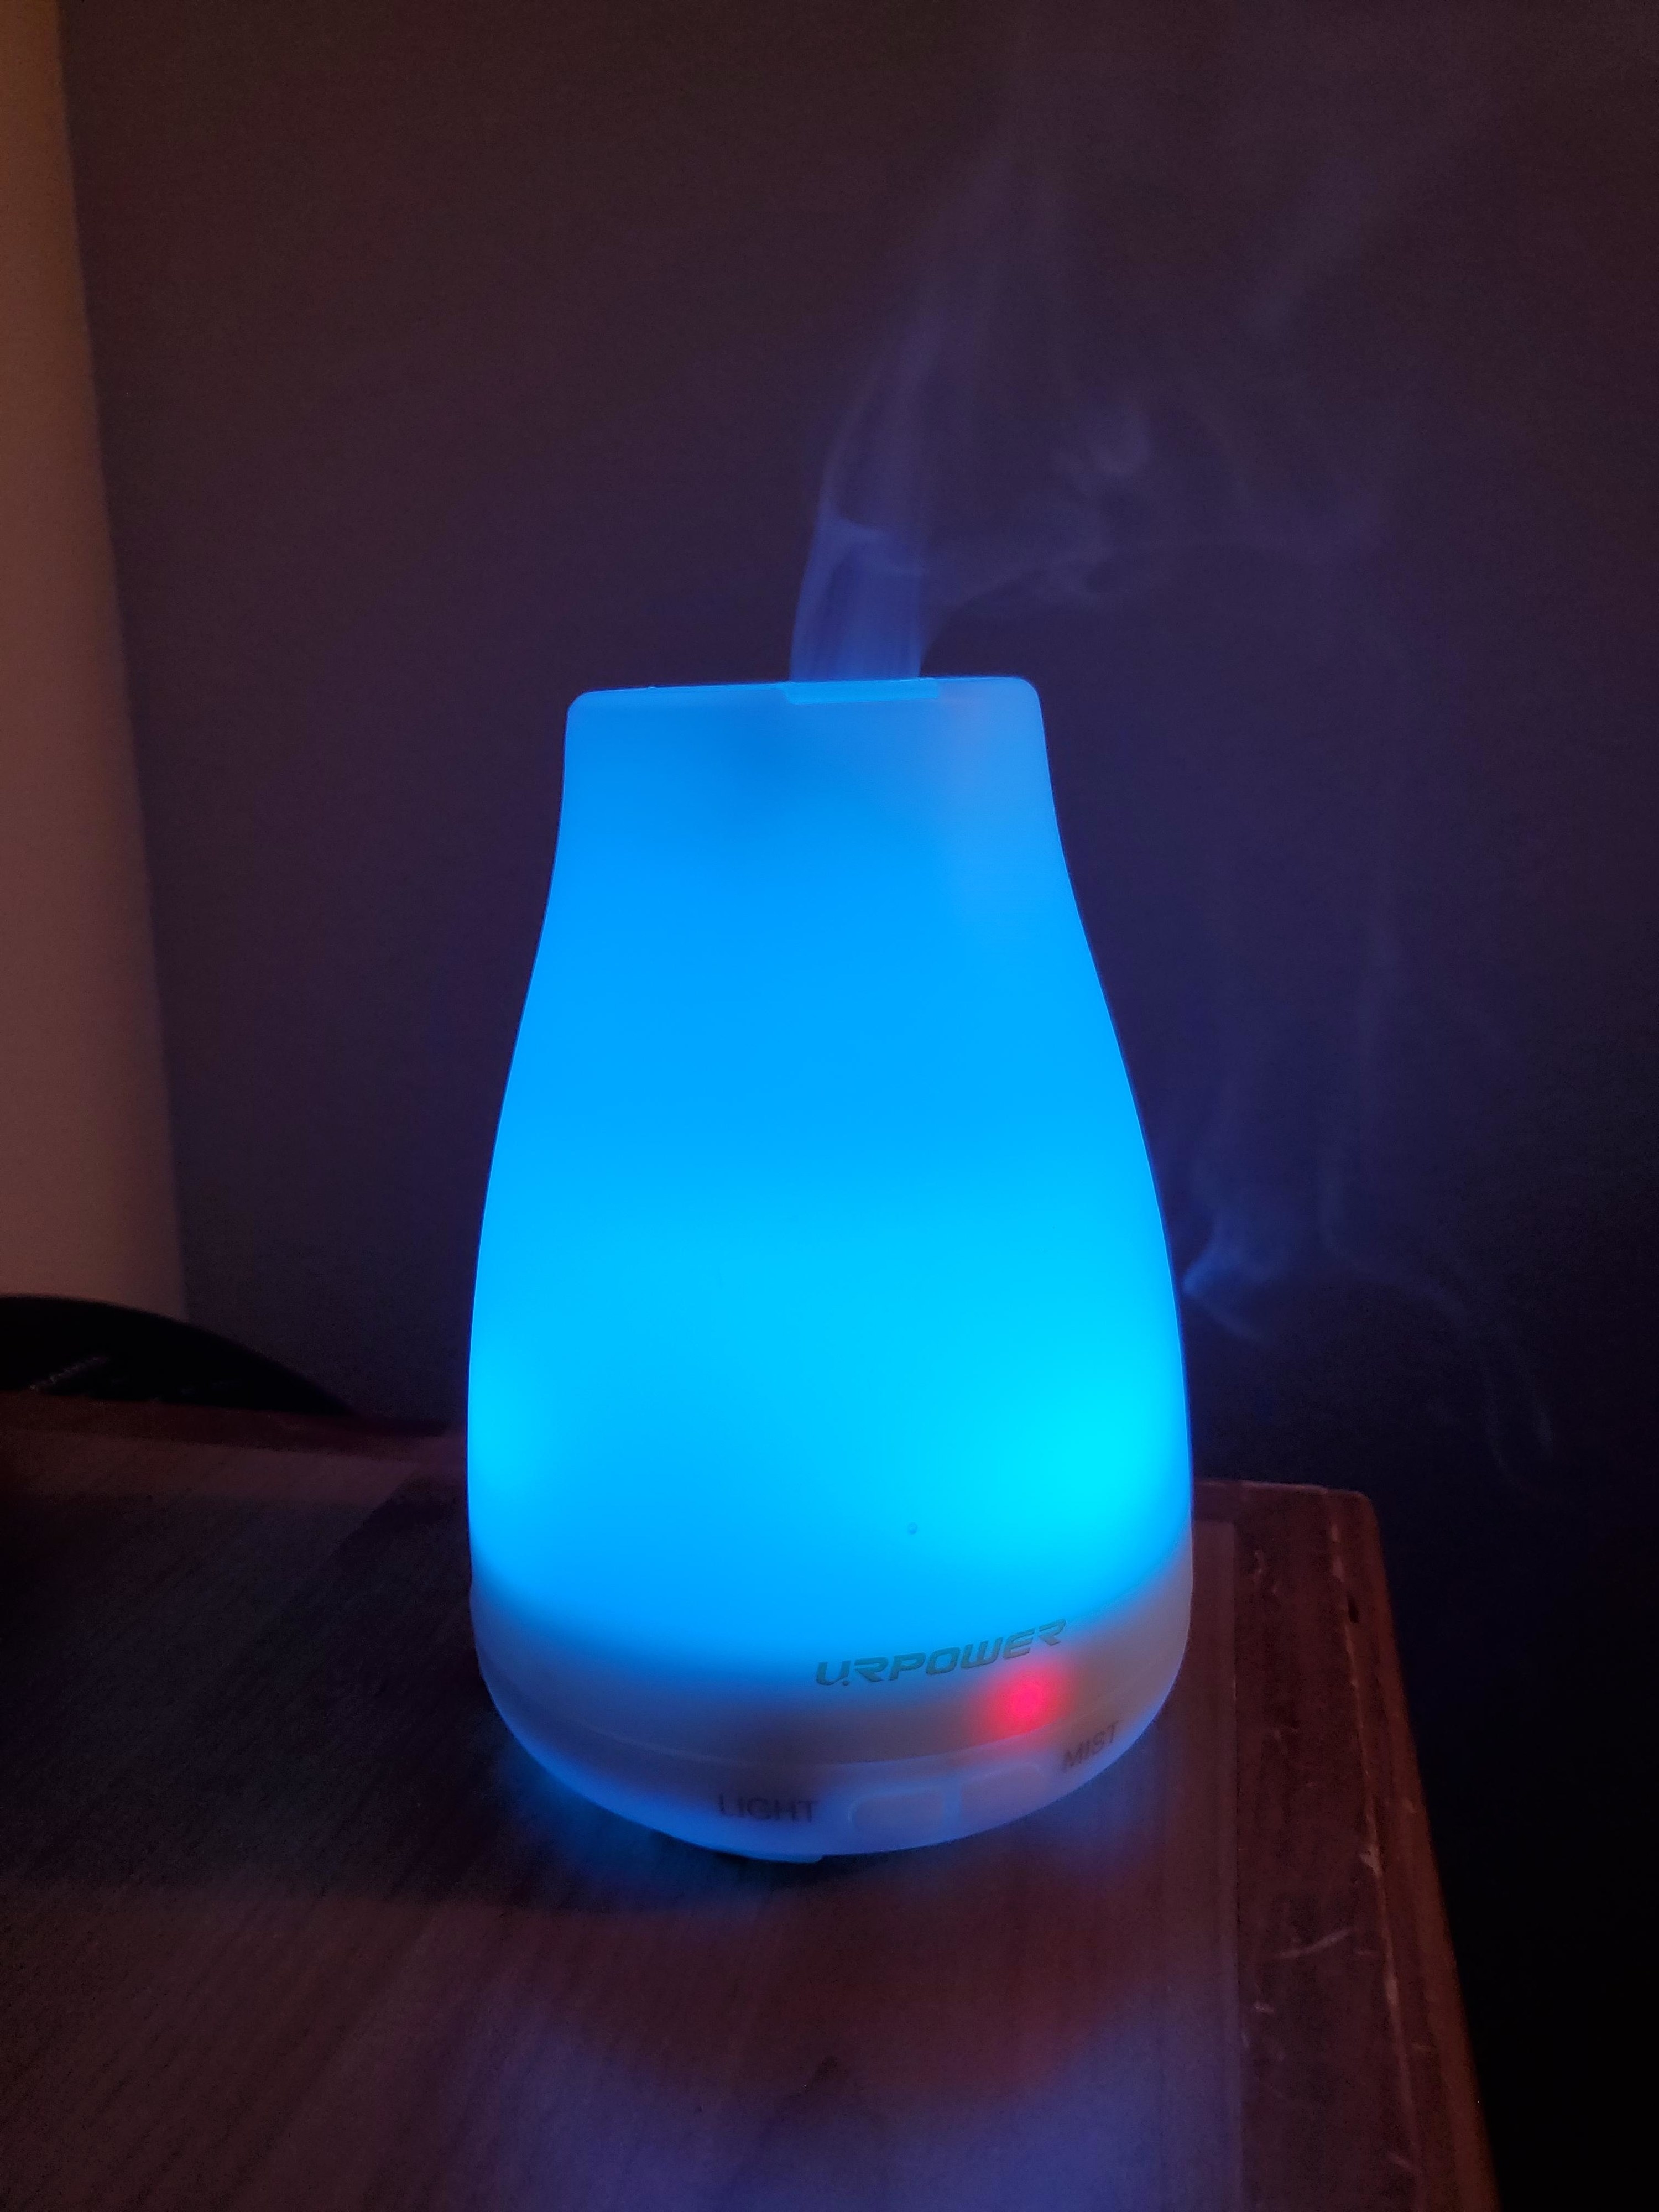 Reviewer image of the diffuser lit up with the color blue